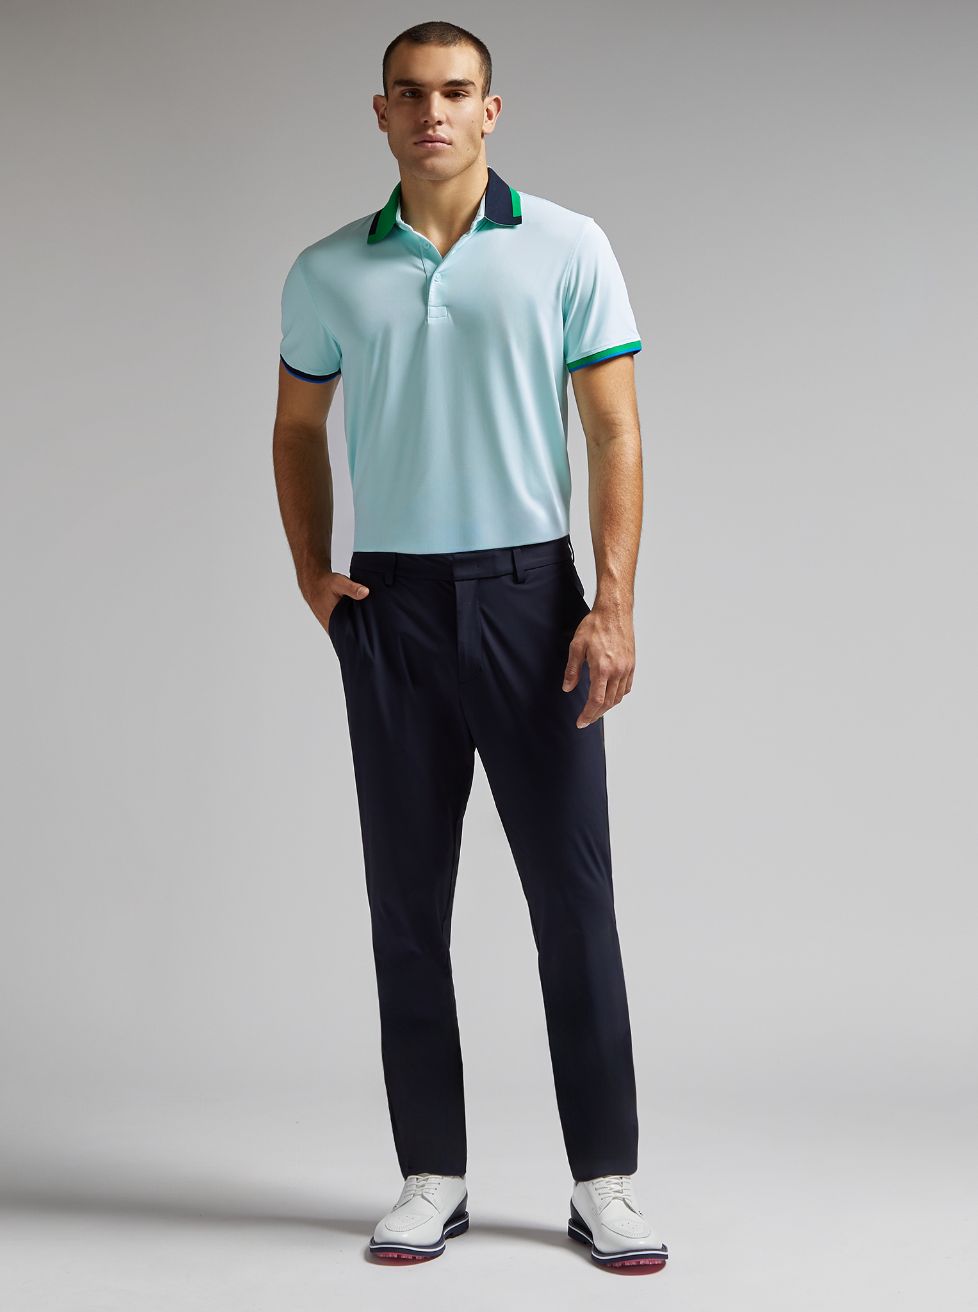 Learn more about Warp Knit Straight Leg<br> Trouser